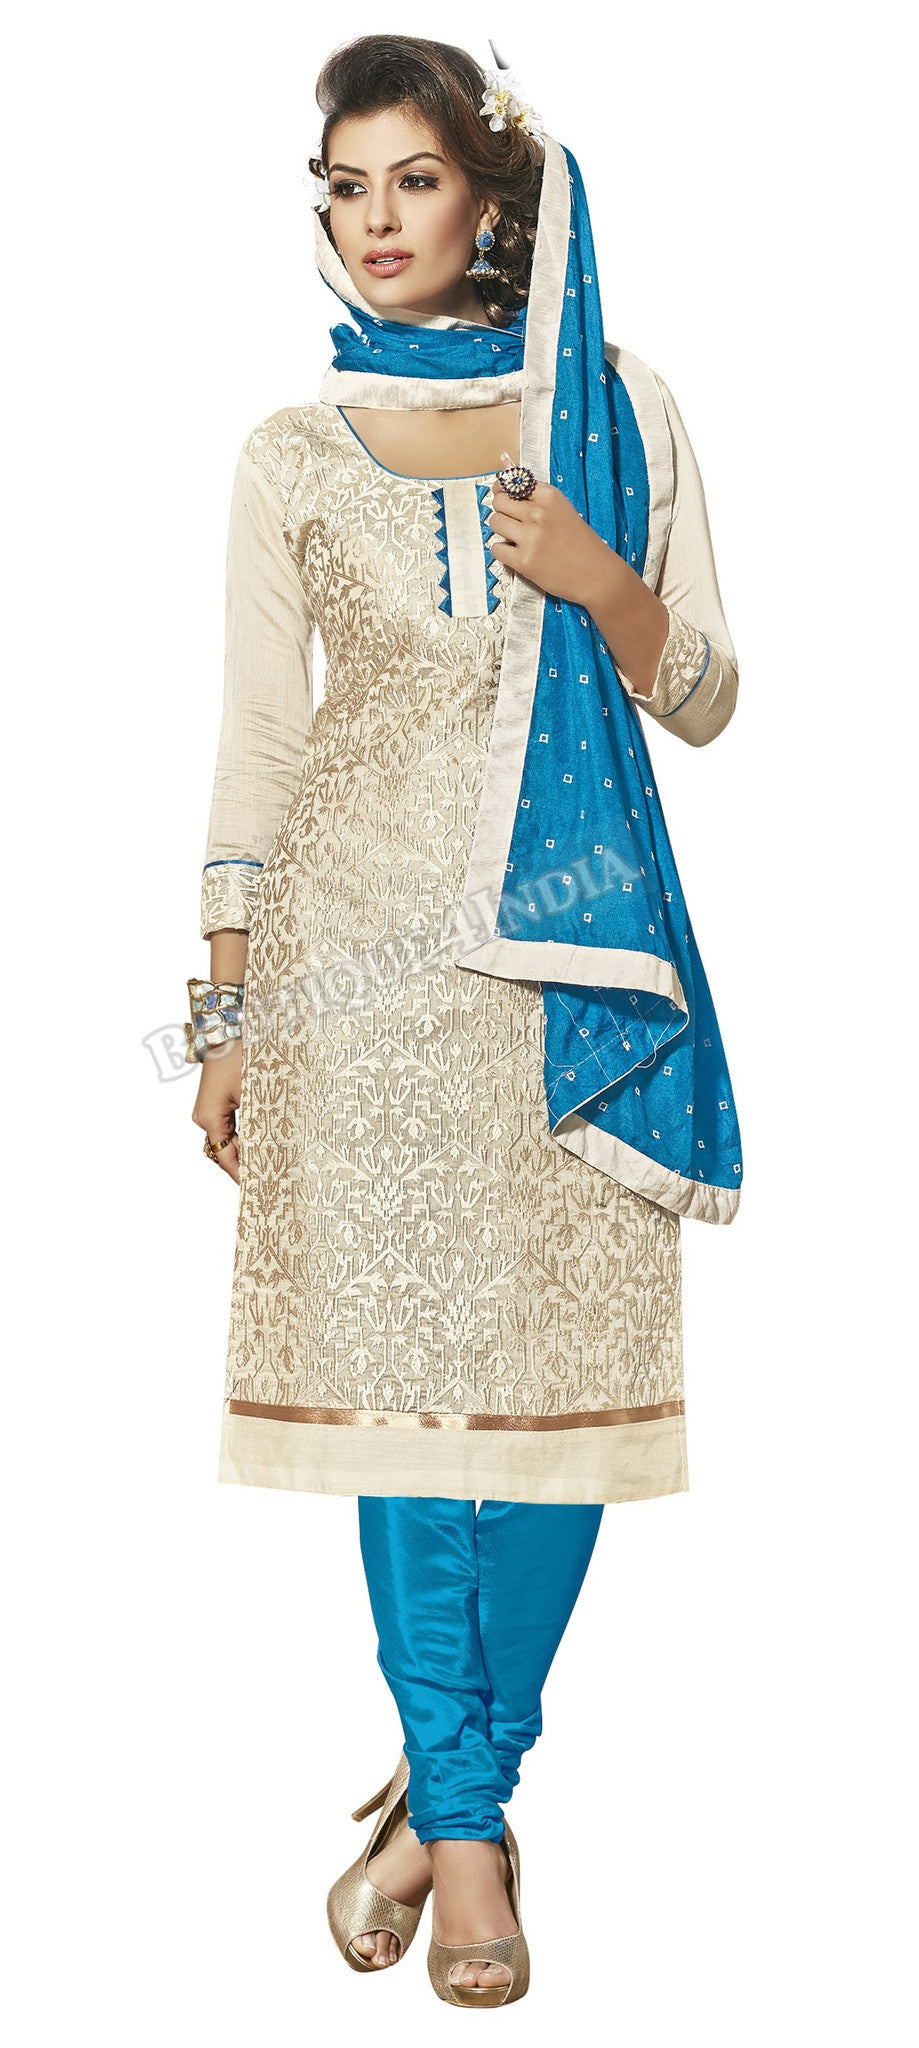 Off white and blue Color Chanderi Embroidered Straight Cut Salwar Suit